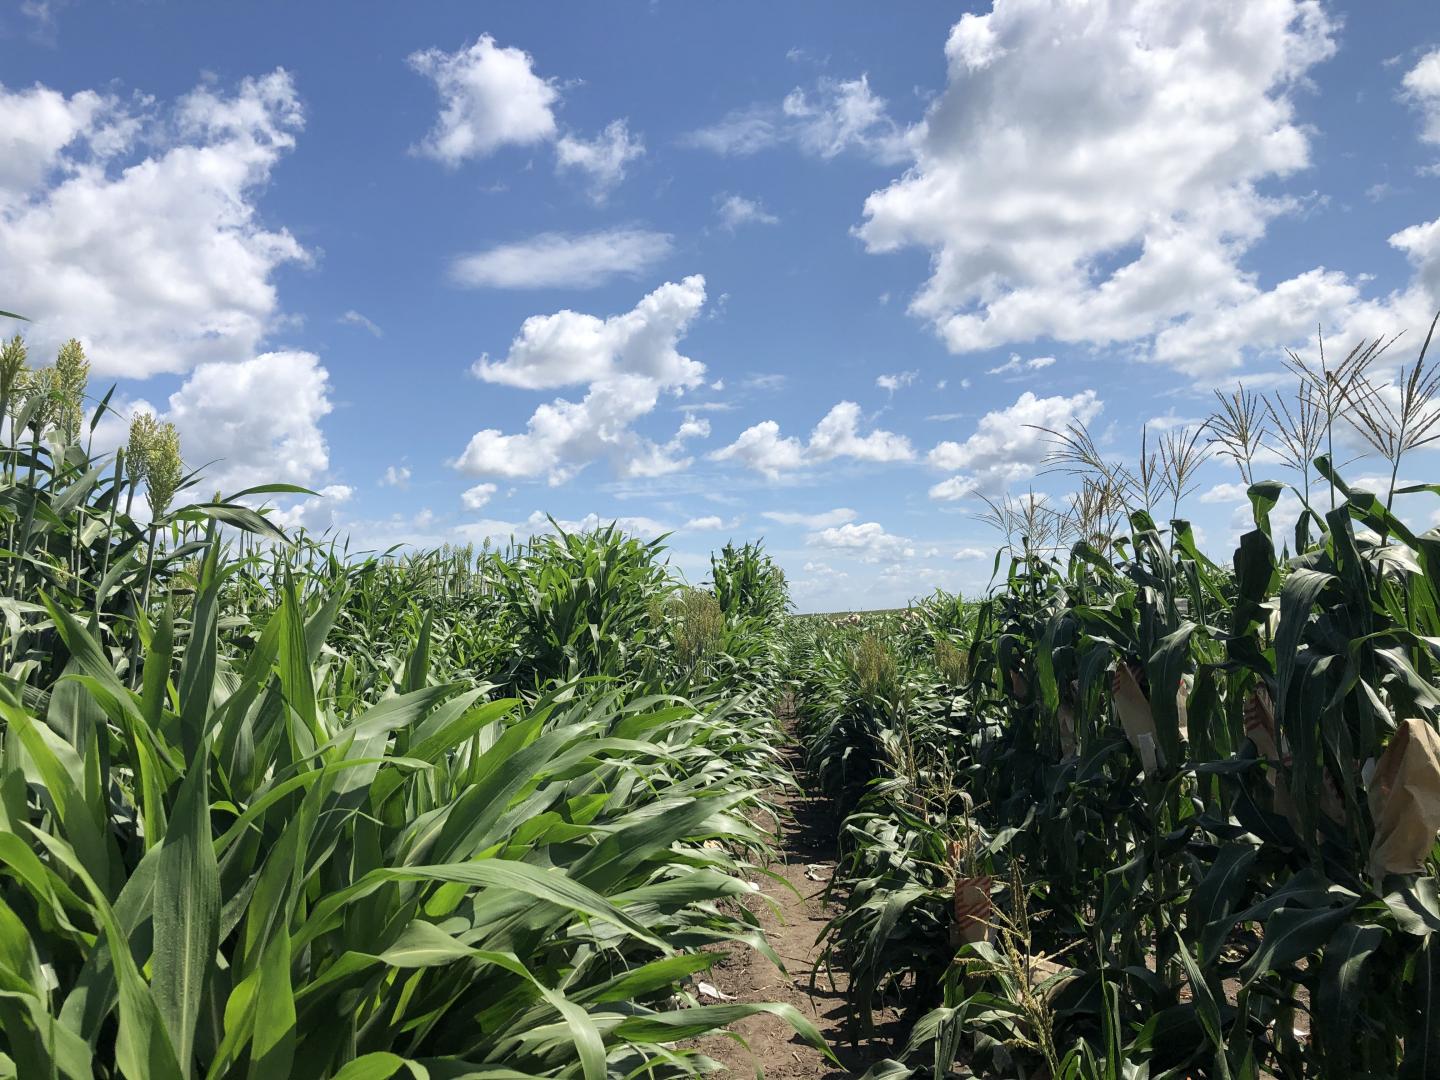 Rows of Corn Plants Stretch to the Horizon under a Blue Sky